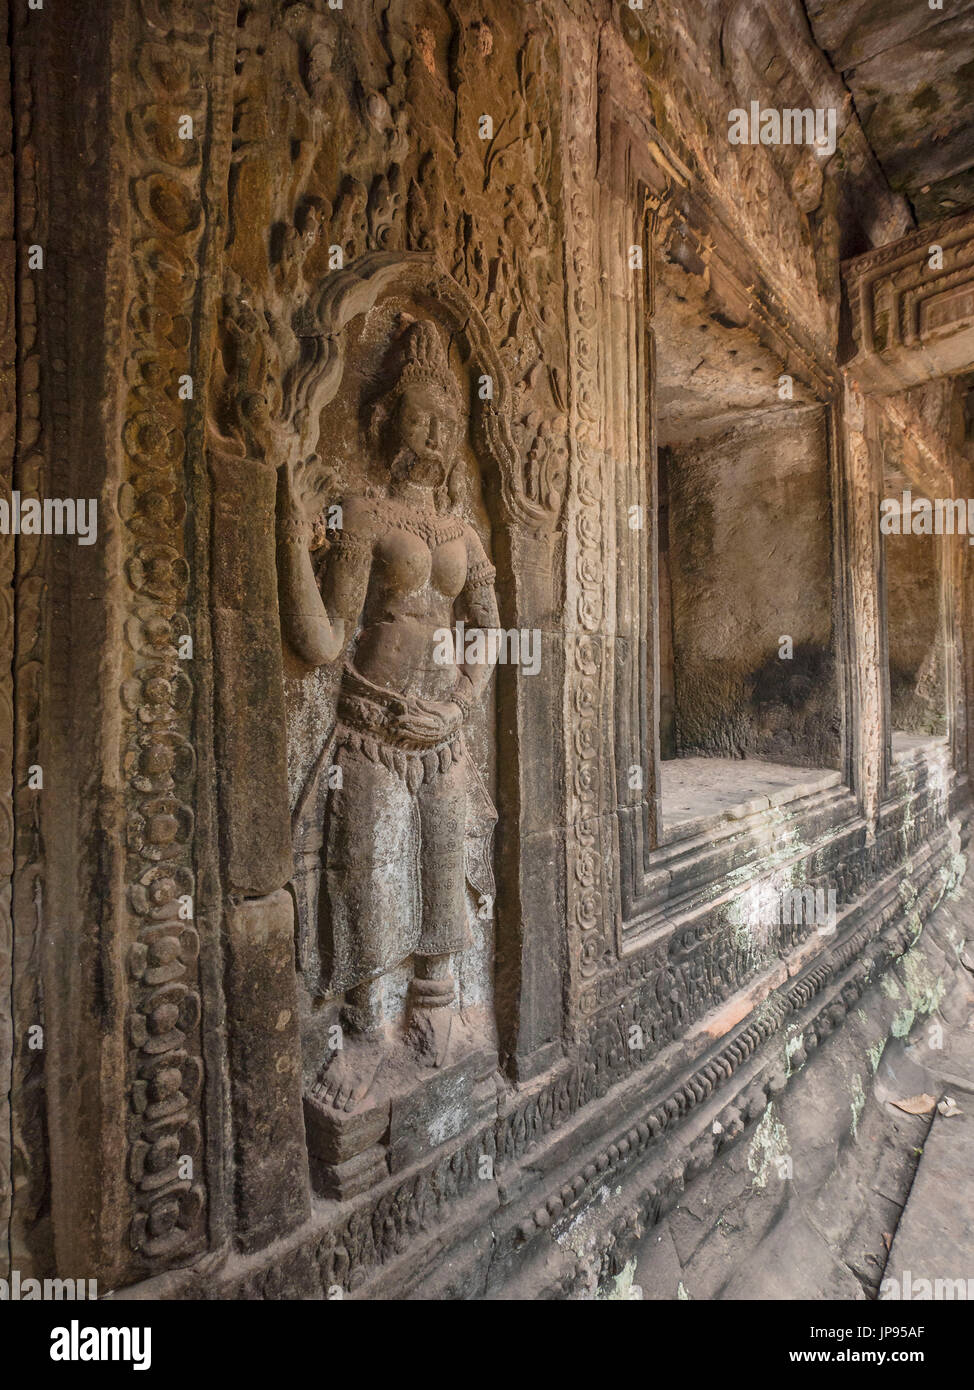 Ruins at Ta Prohm, Angkor Archaeological Park, Stock Photo